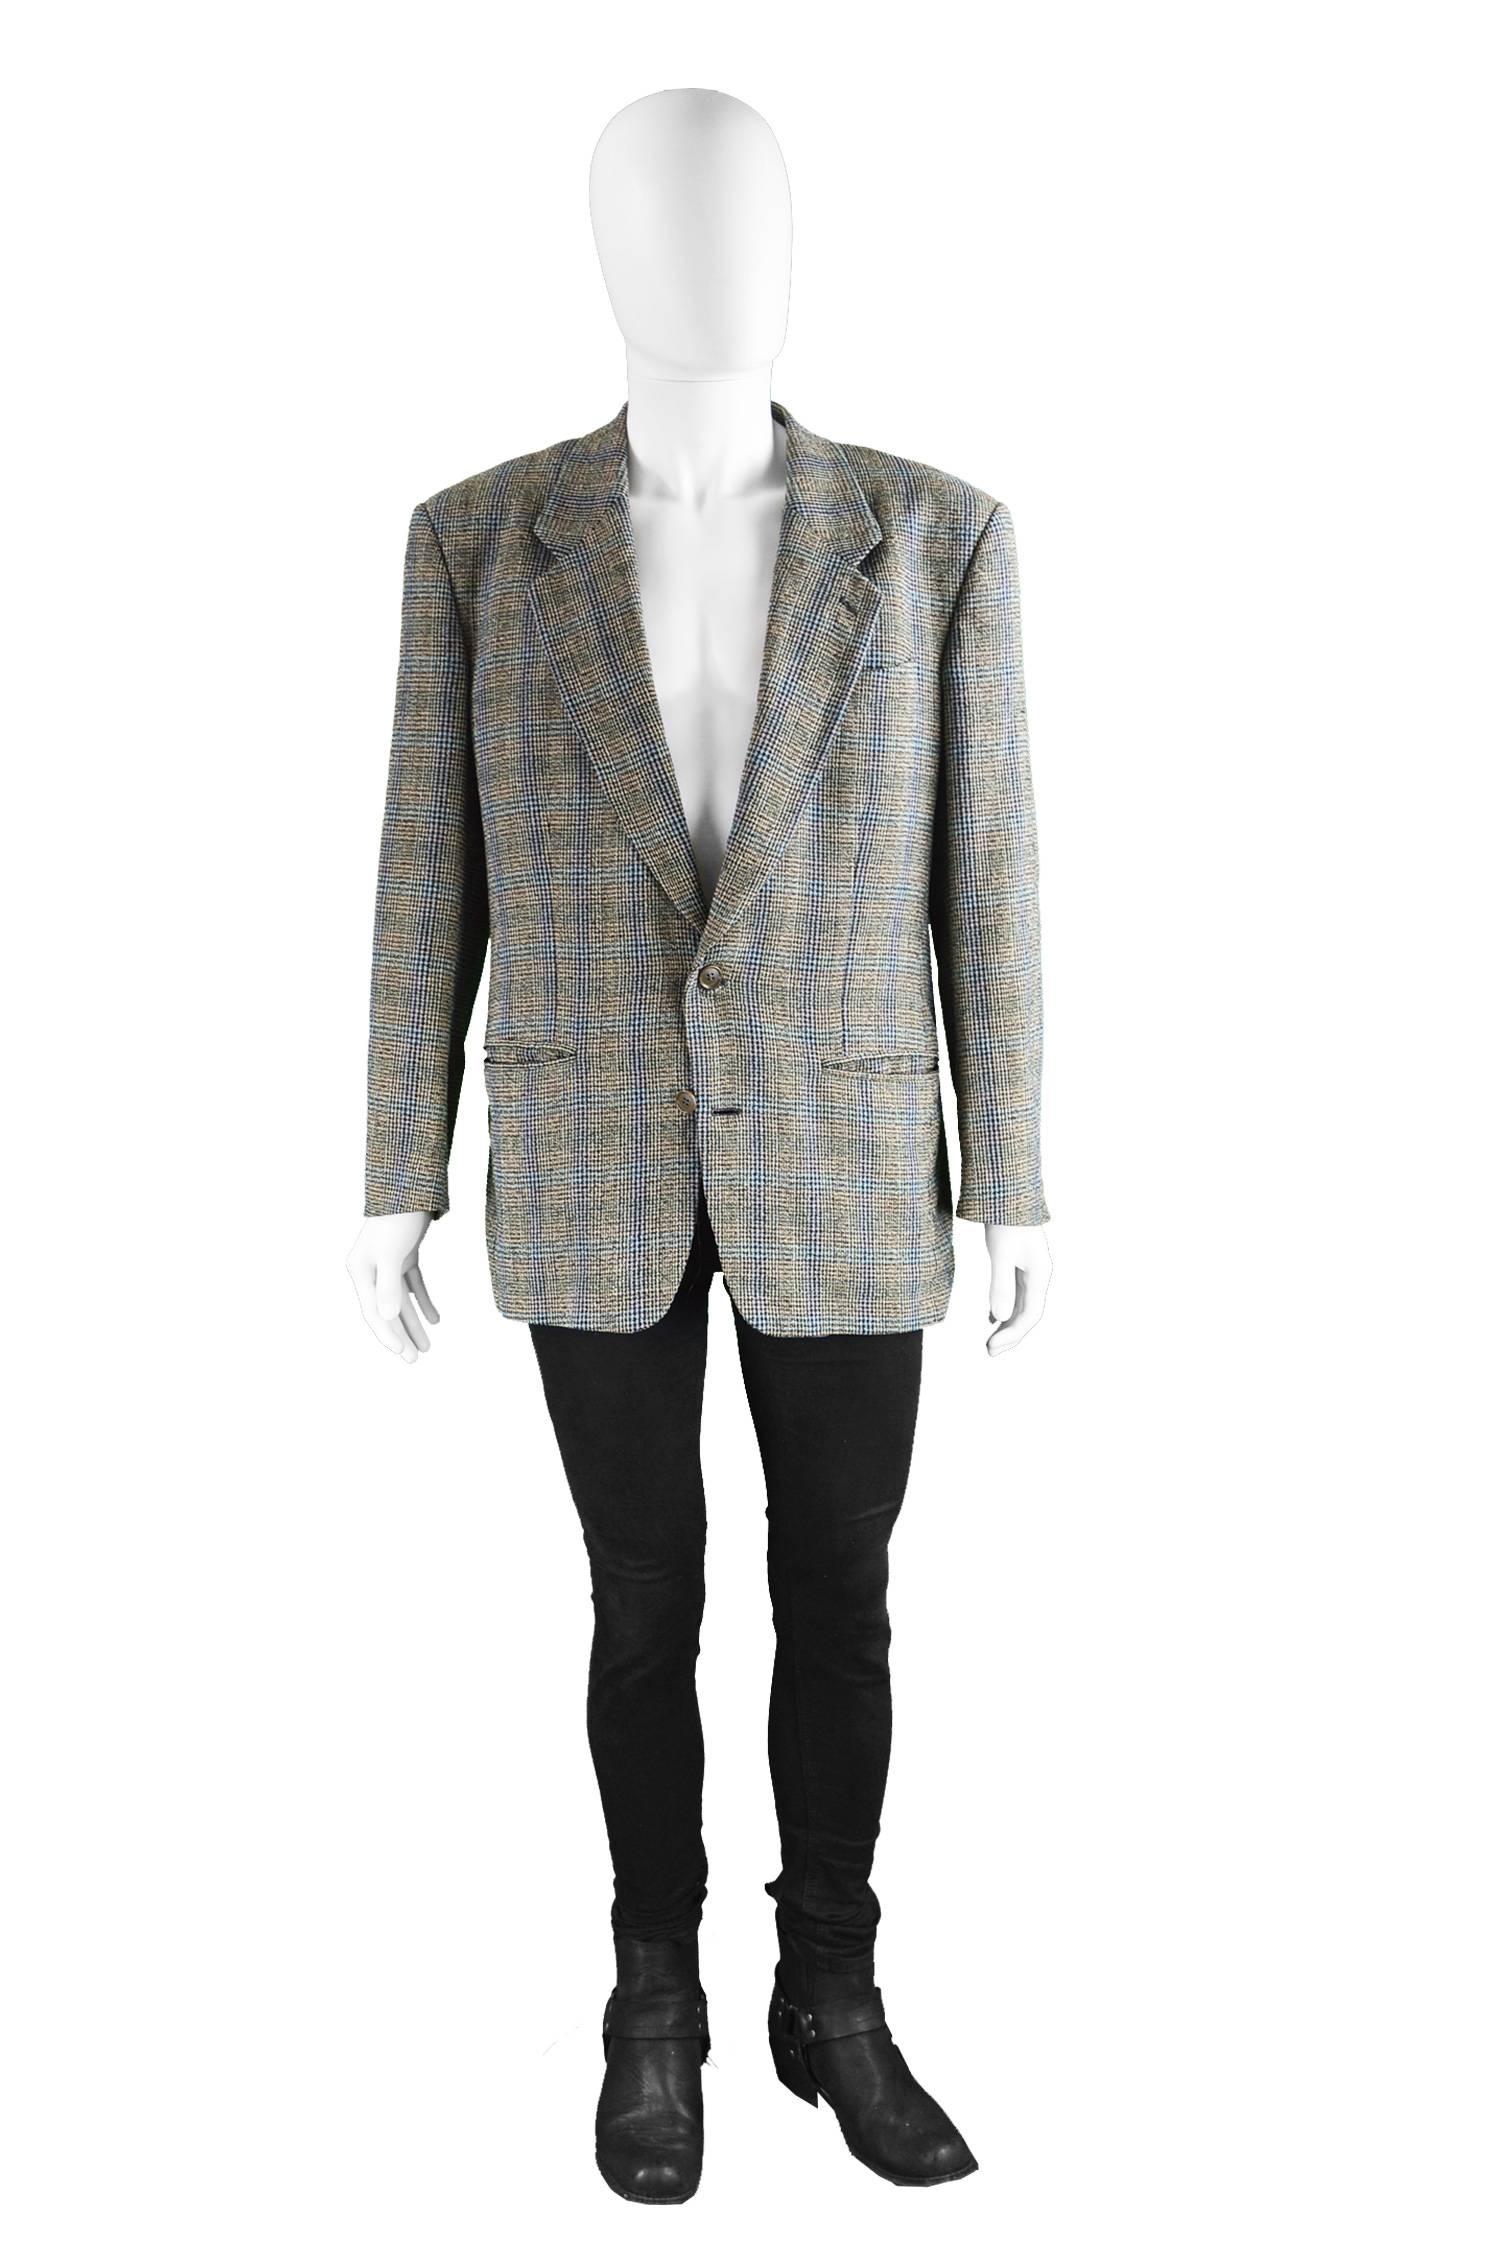 Missoni Uomo Vintage Mens Multicolored Checked Wool sport Coat, 1980s

Estimated Size: Men's Large. Please check measurements. 
Chest - 44” / 112cm (allow a couple of inches room for movement)
Length (Shoulder to Hem) - 29” / 73cm
Shoulder to